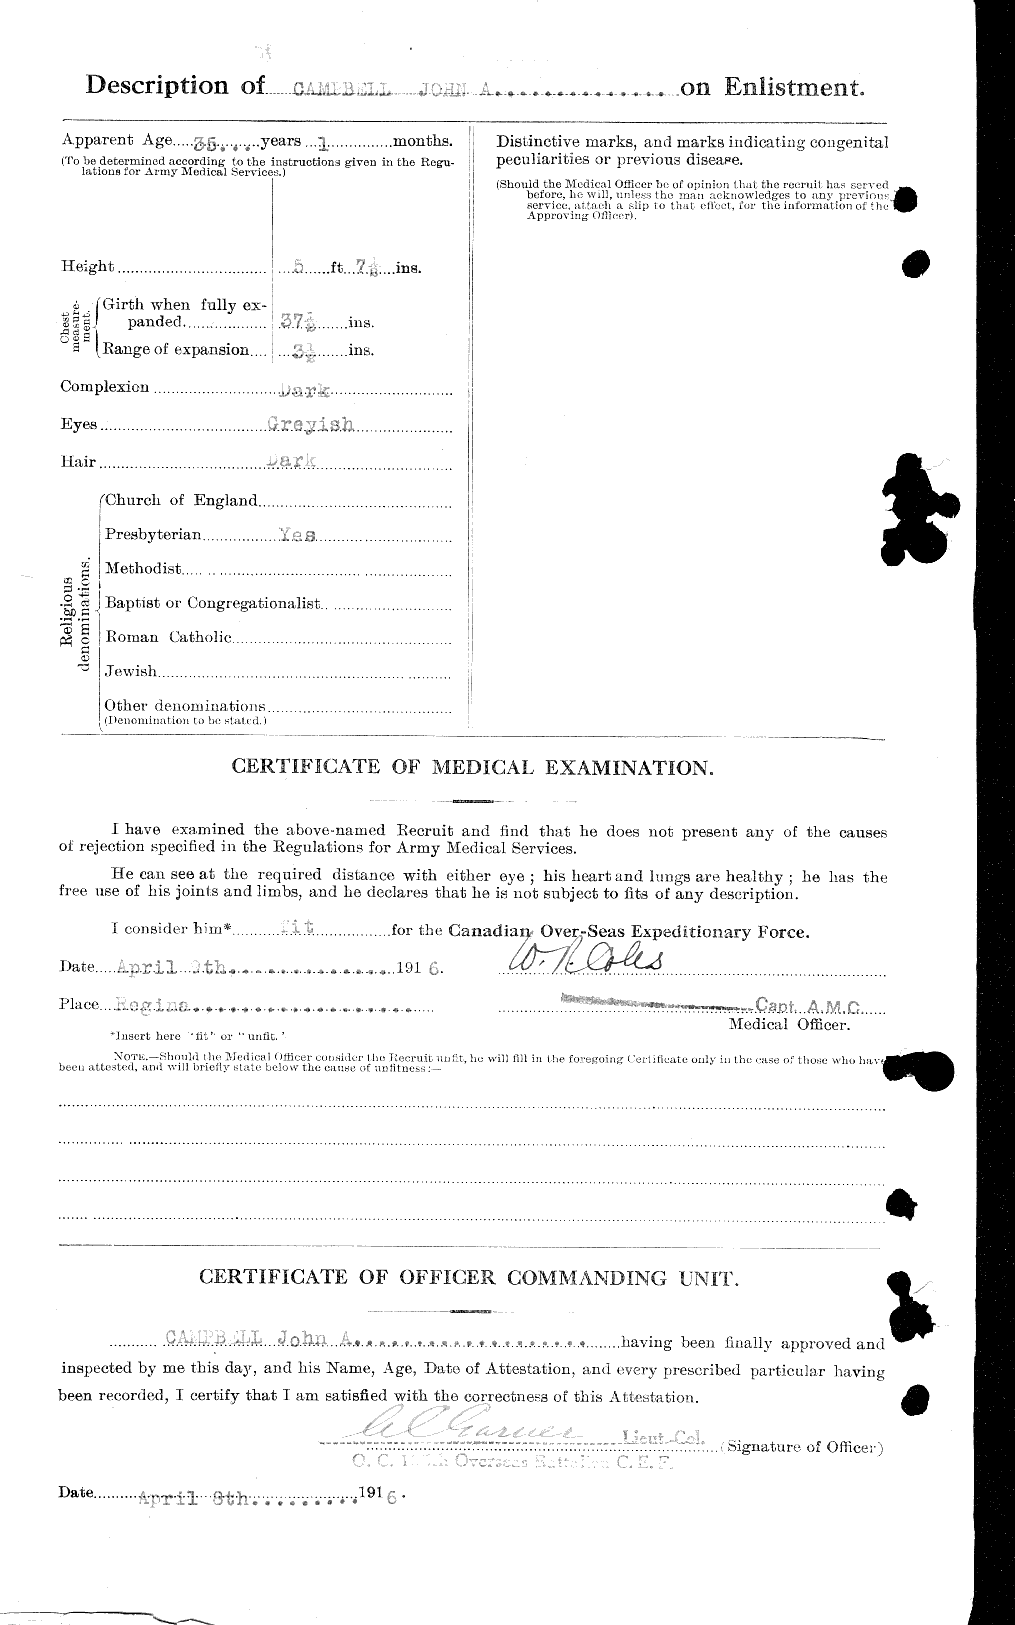 Personnel Records of the First World War - CEF 006849b